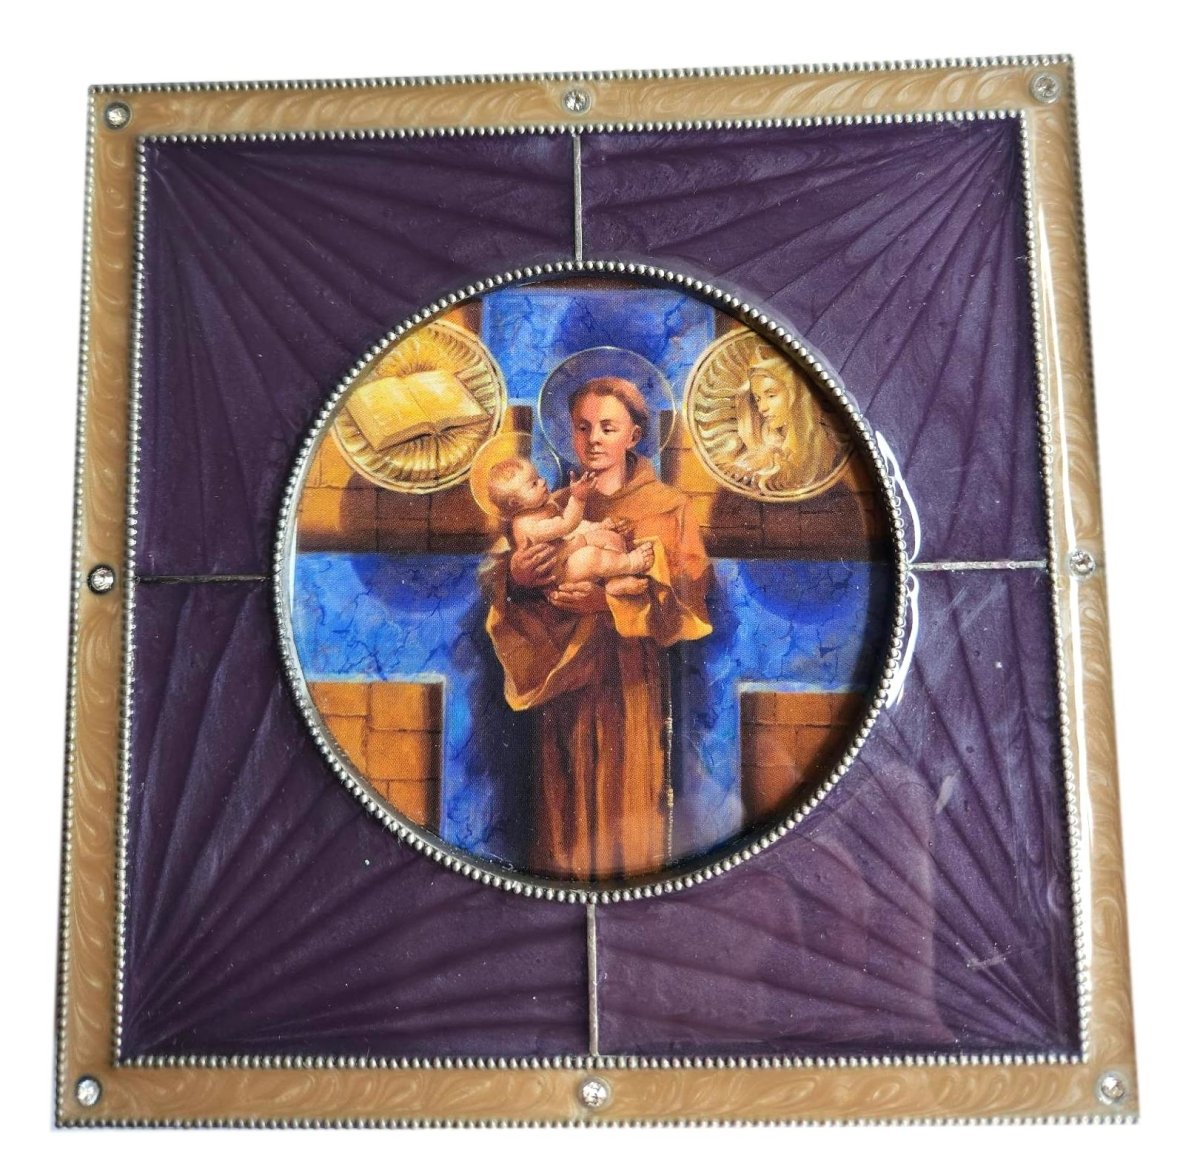 Saint Anthony Frame TabletopH: 6 inches X W: 6 inches - Ysleta Mission Gift Shop